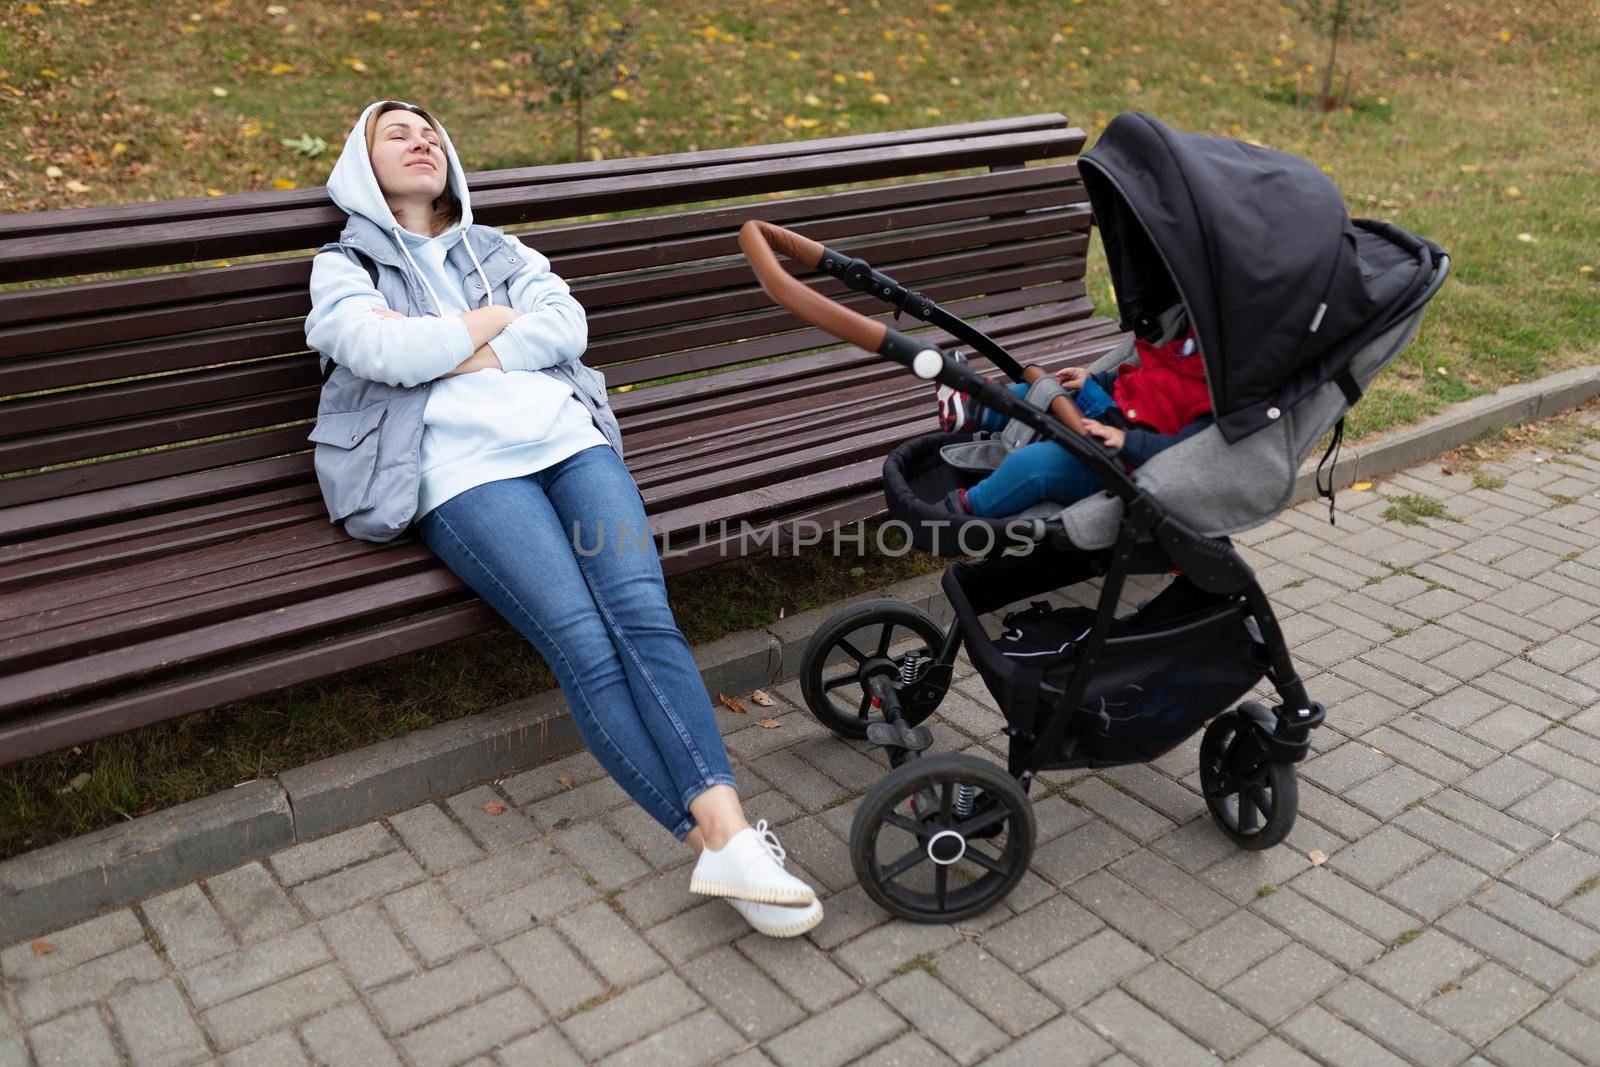 a young woman sleeps on a bench next to the stroller while walking with her small child.